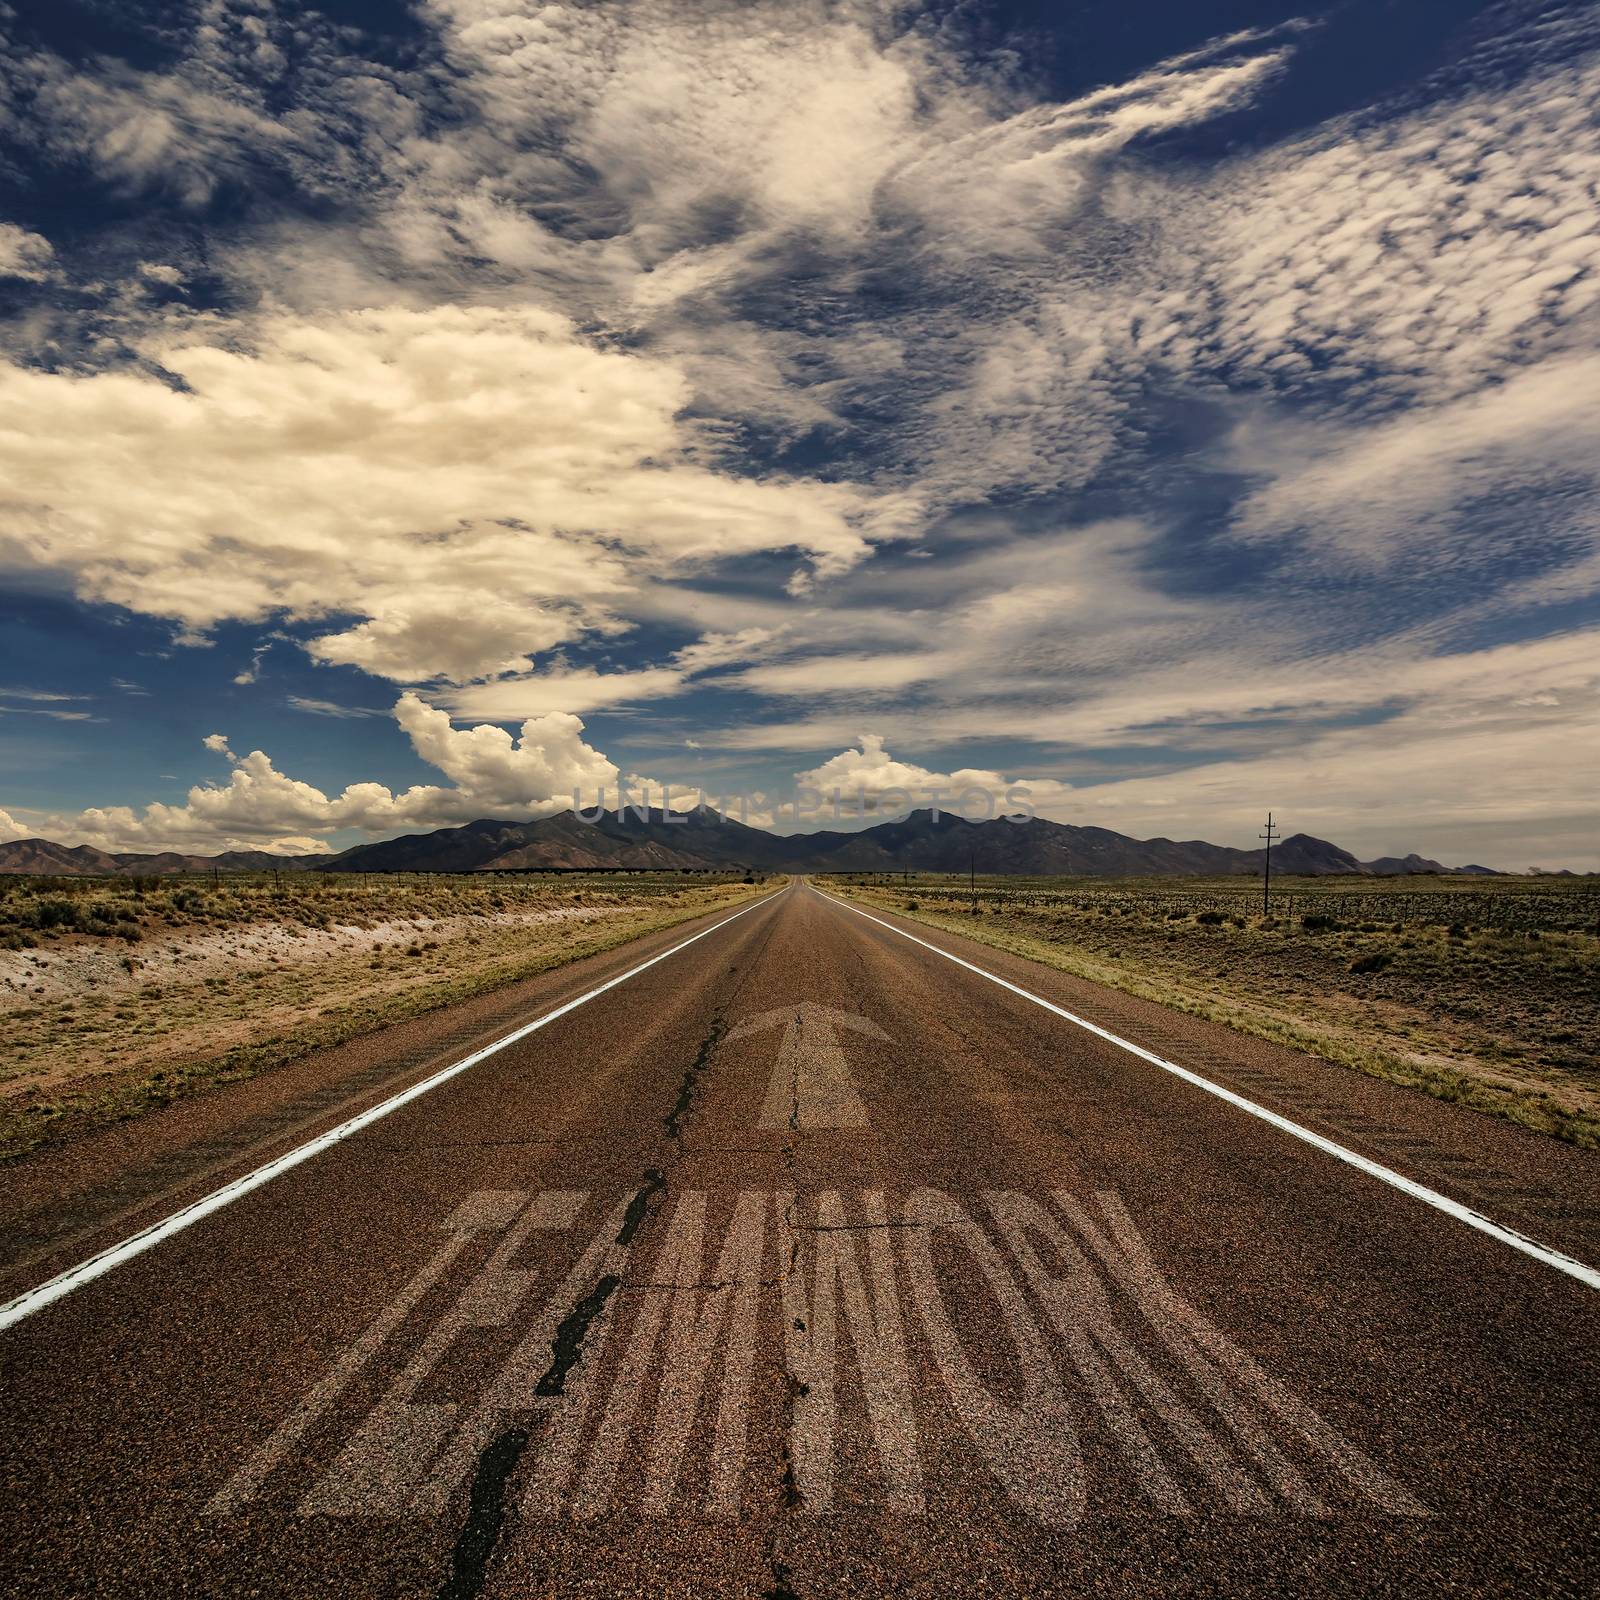 Conceptual image of desert road with the word teamwork and arrow